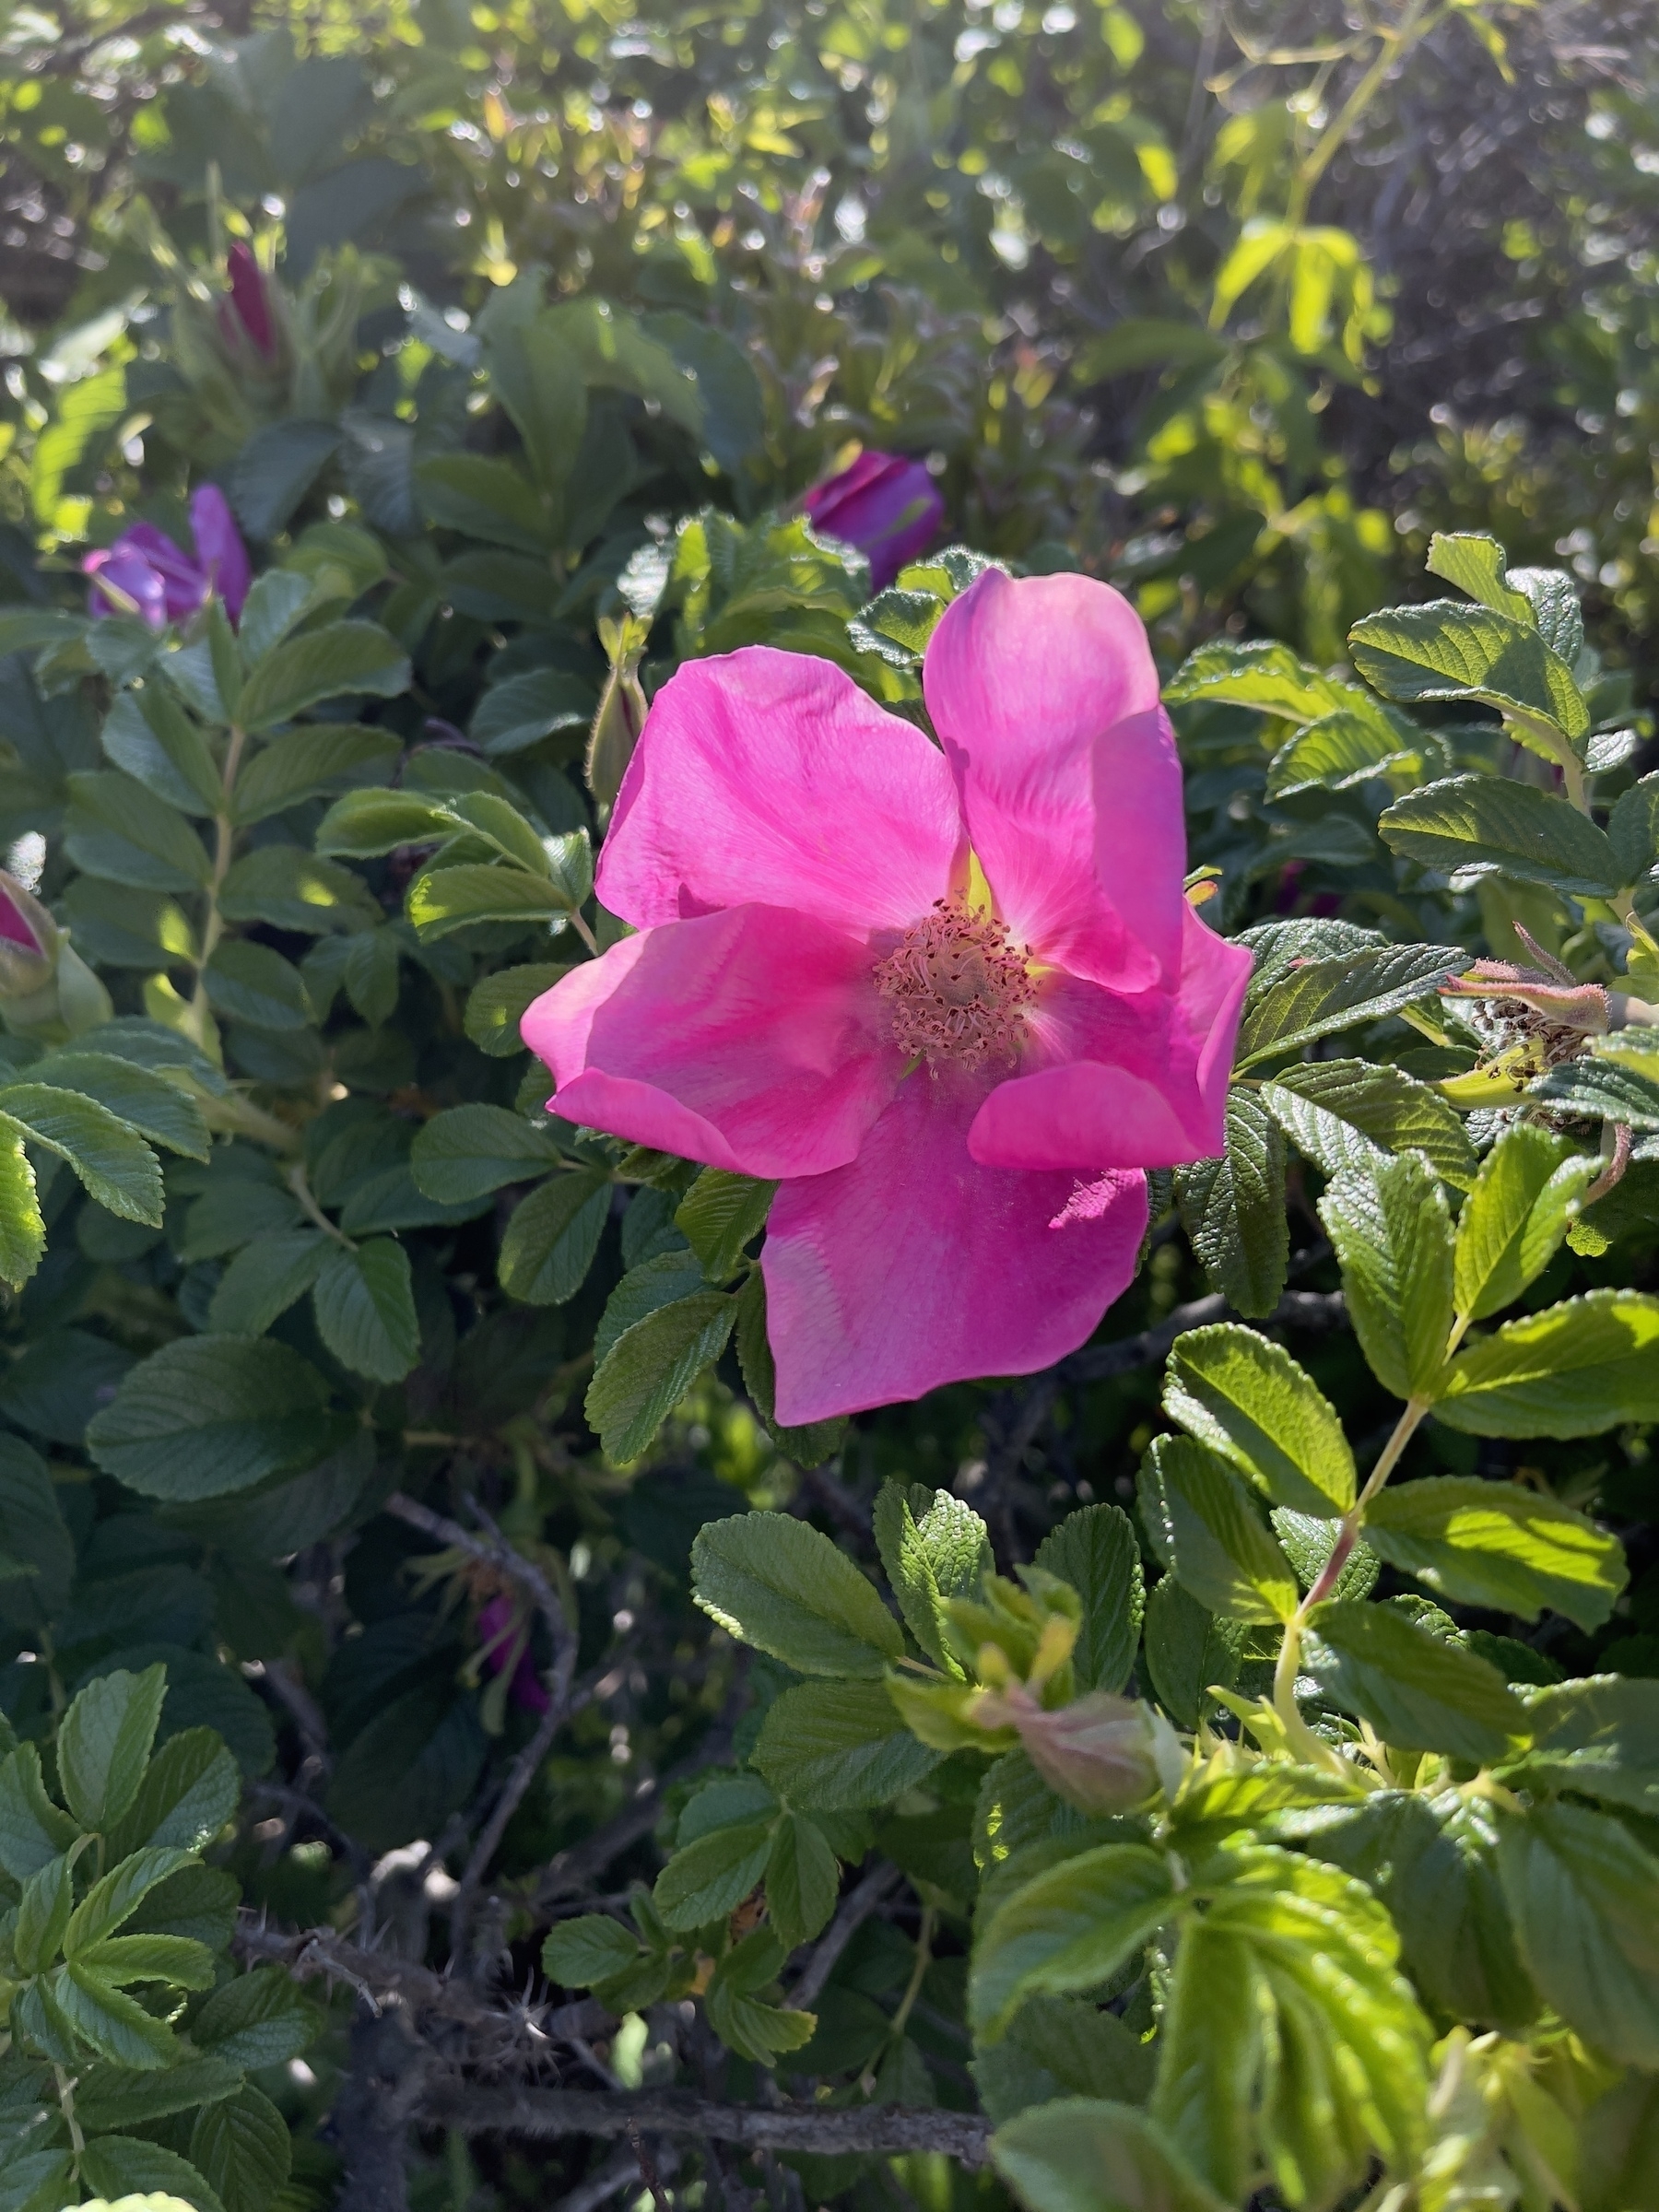 Pink beach rose. They come in white too.